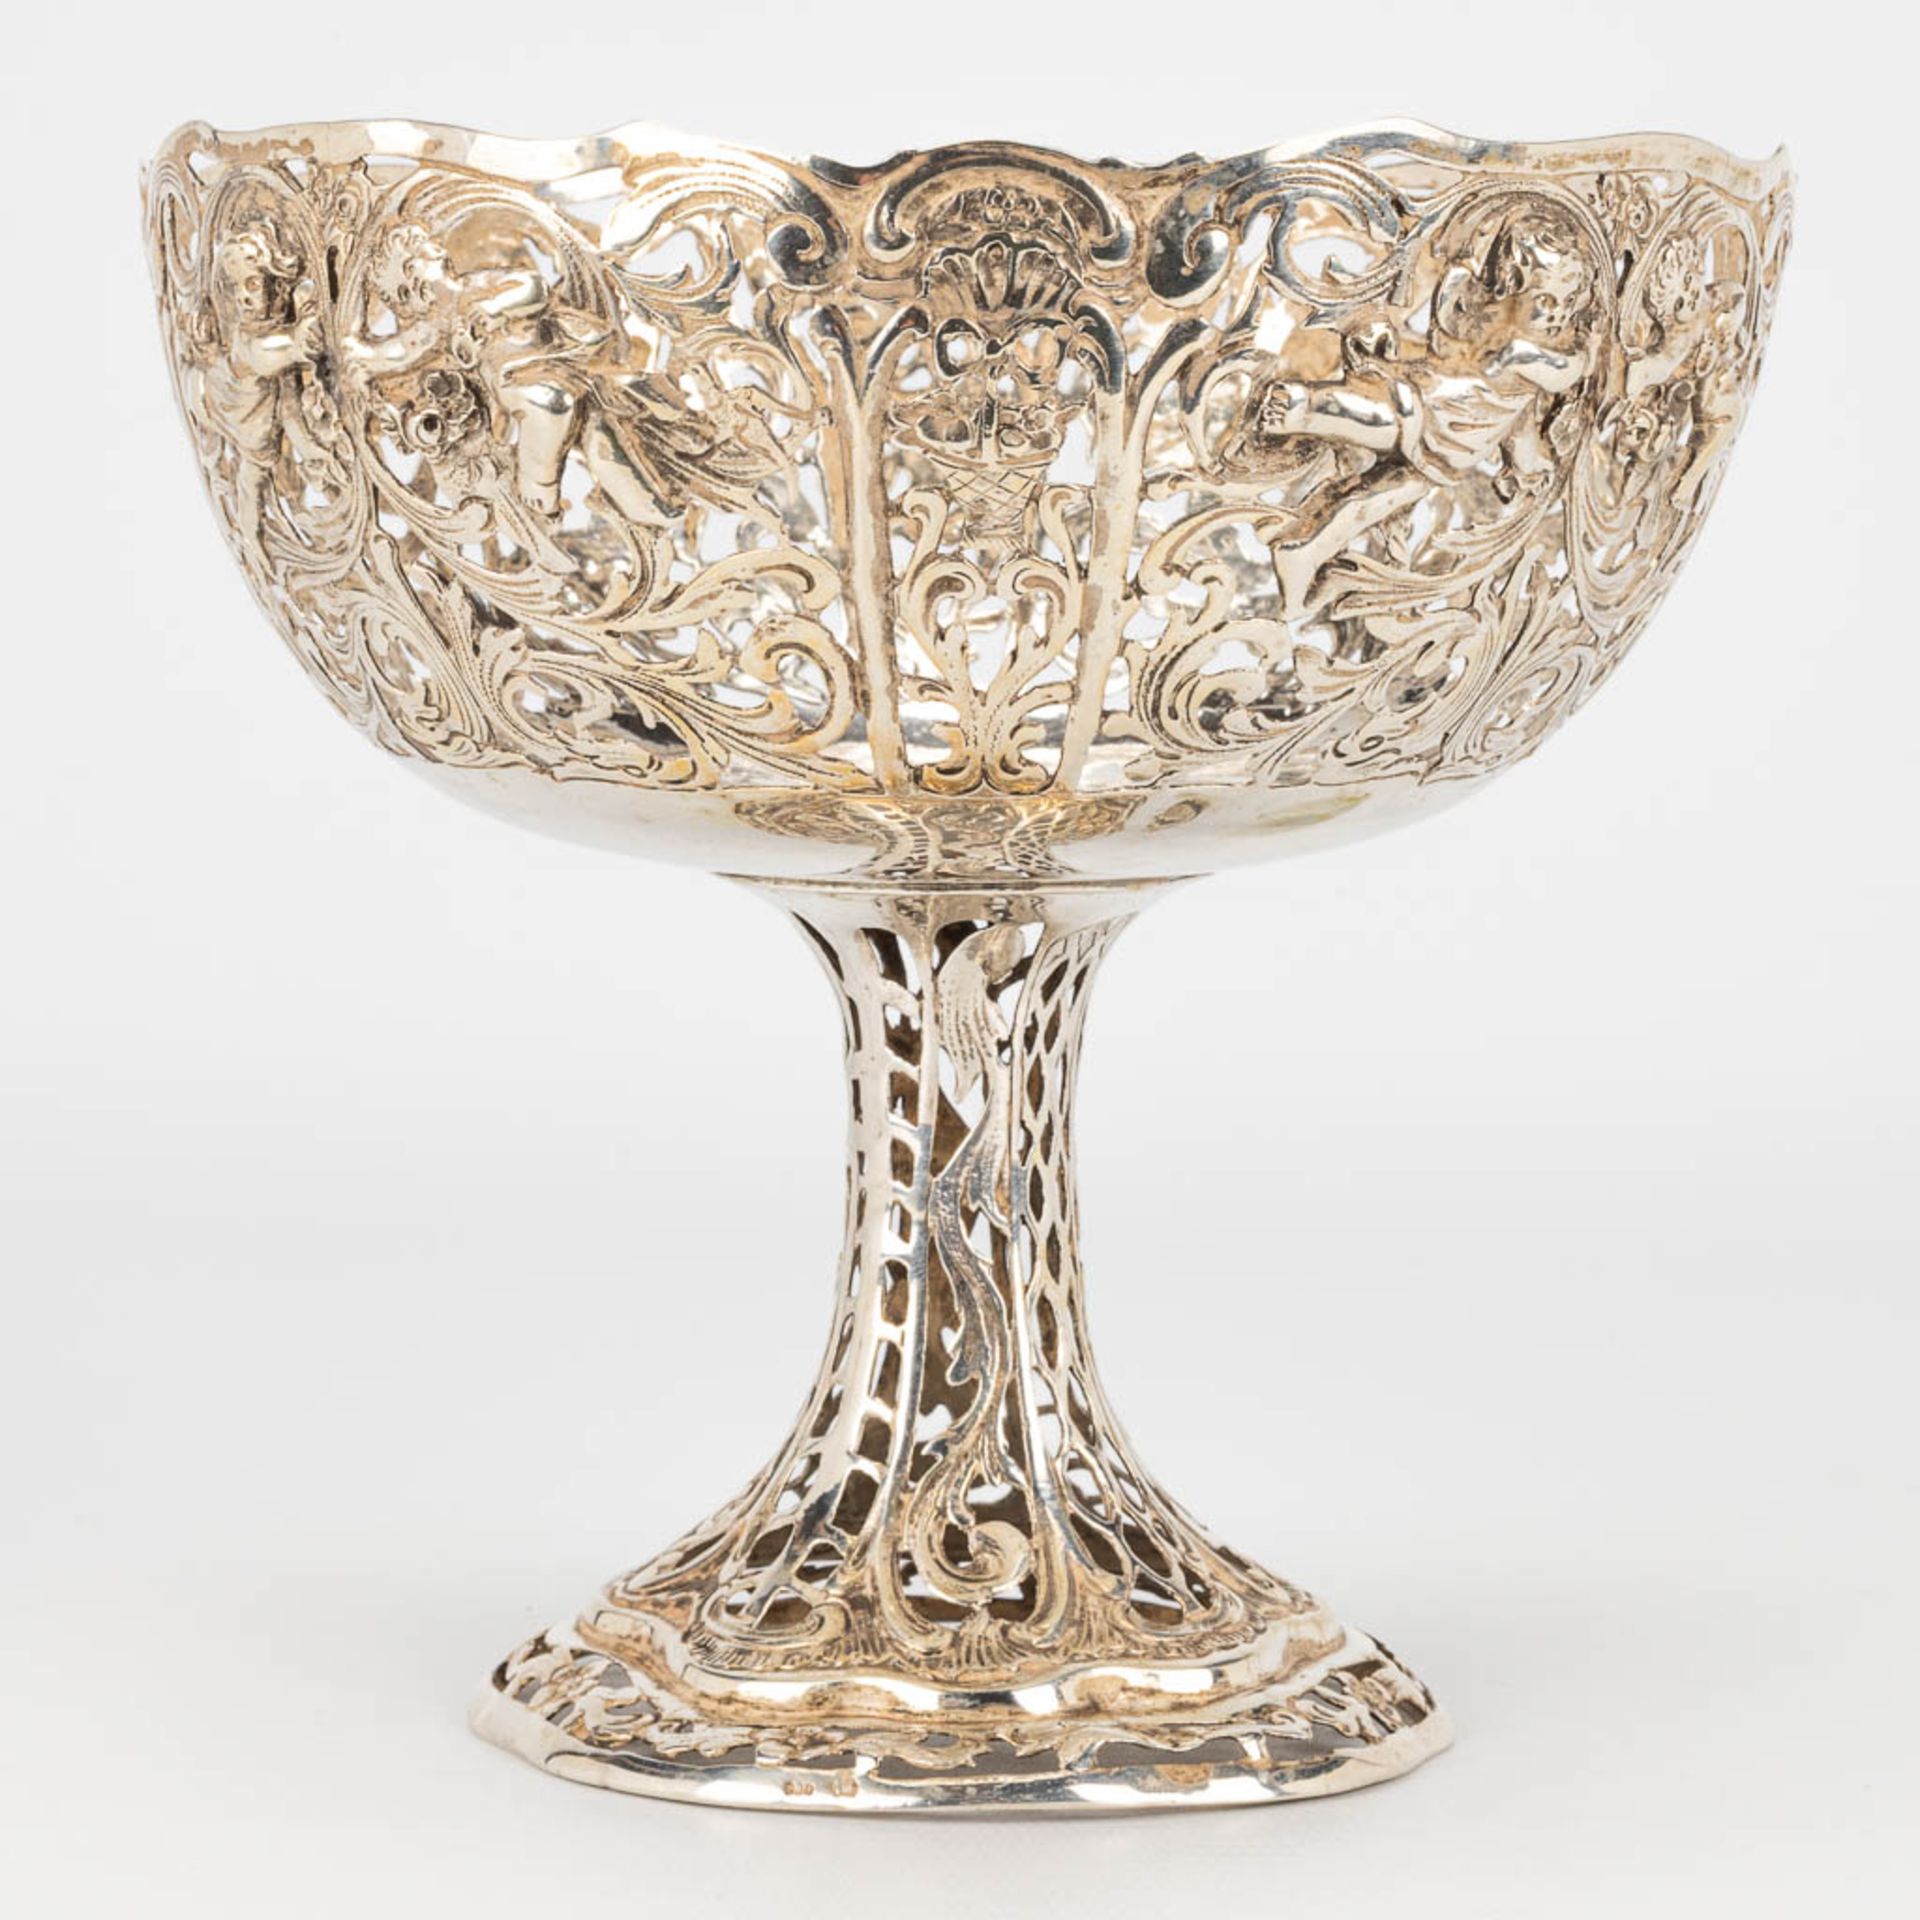 A tazza made of silver and decorated with putti. 248g - Image 3 of 10